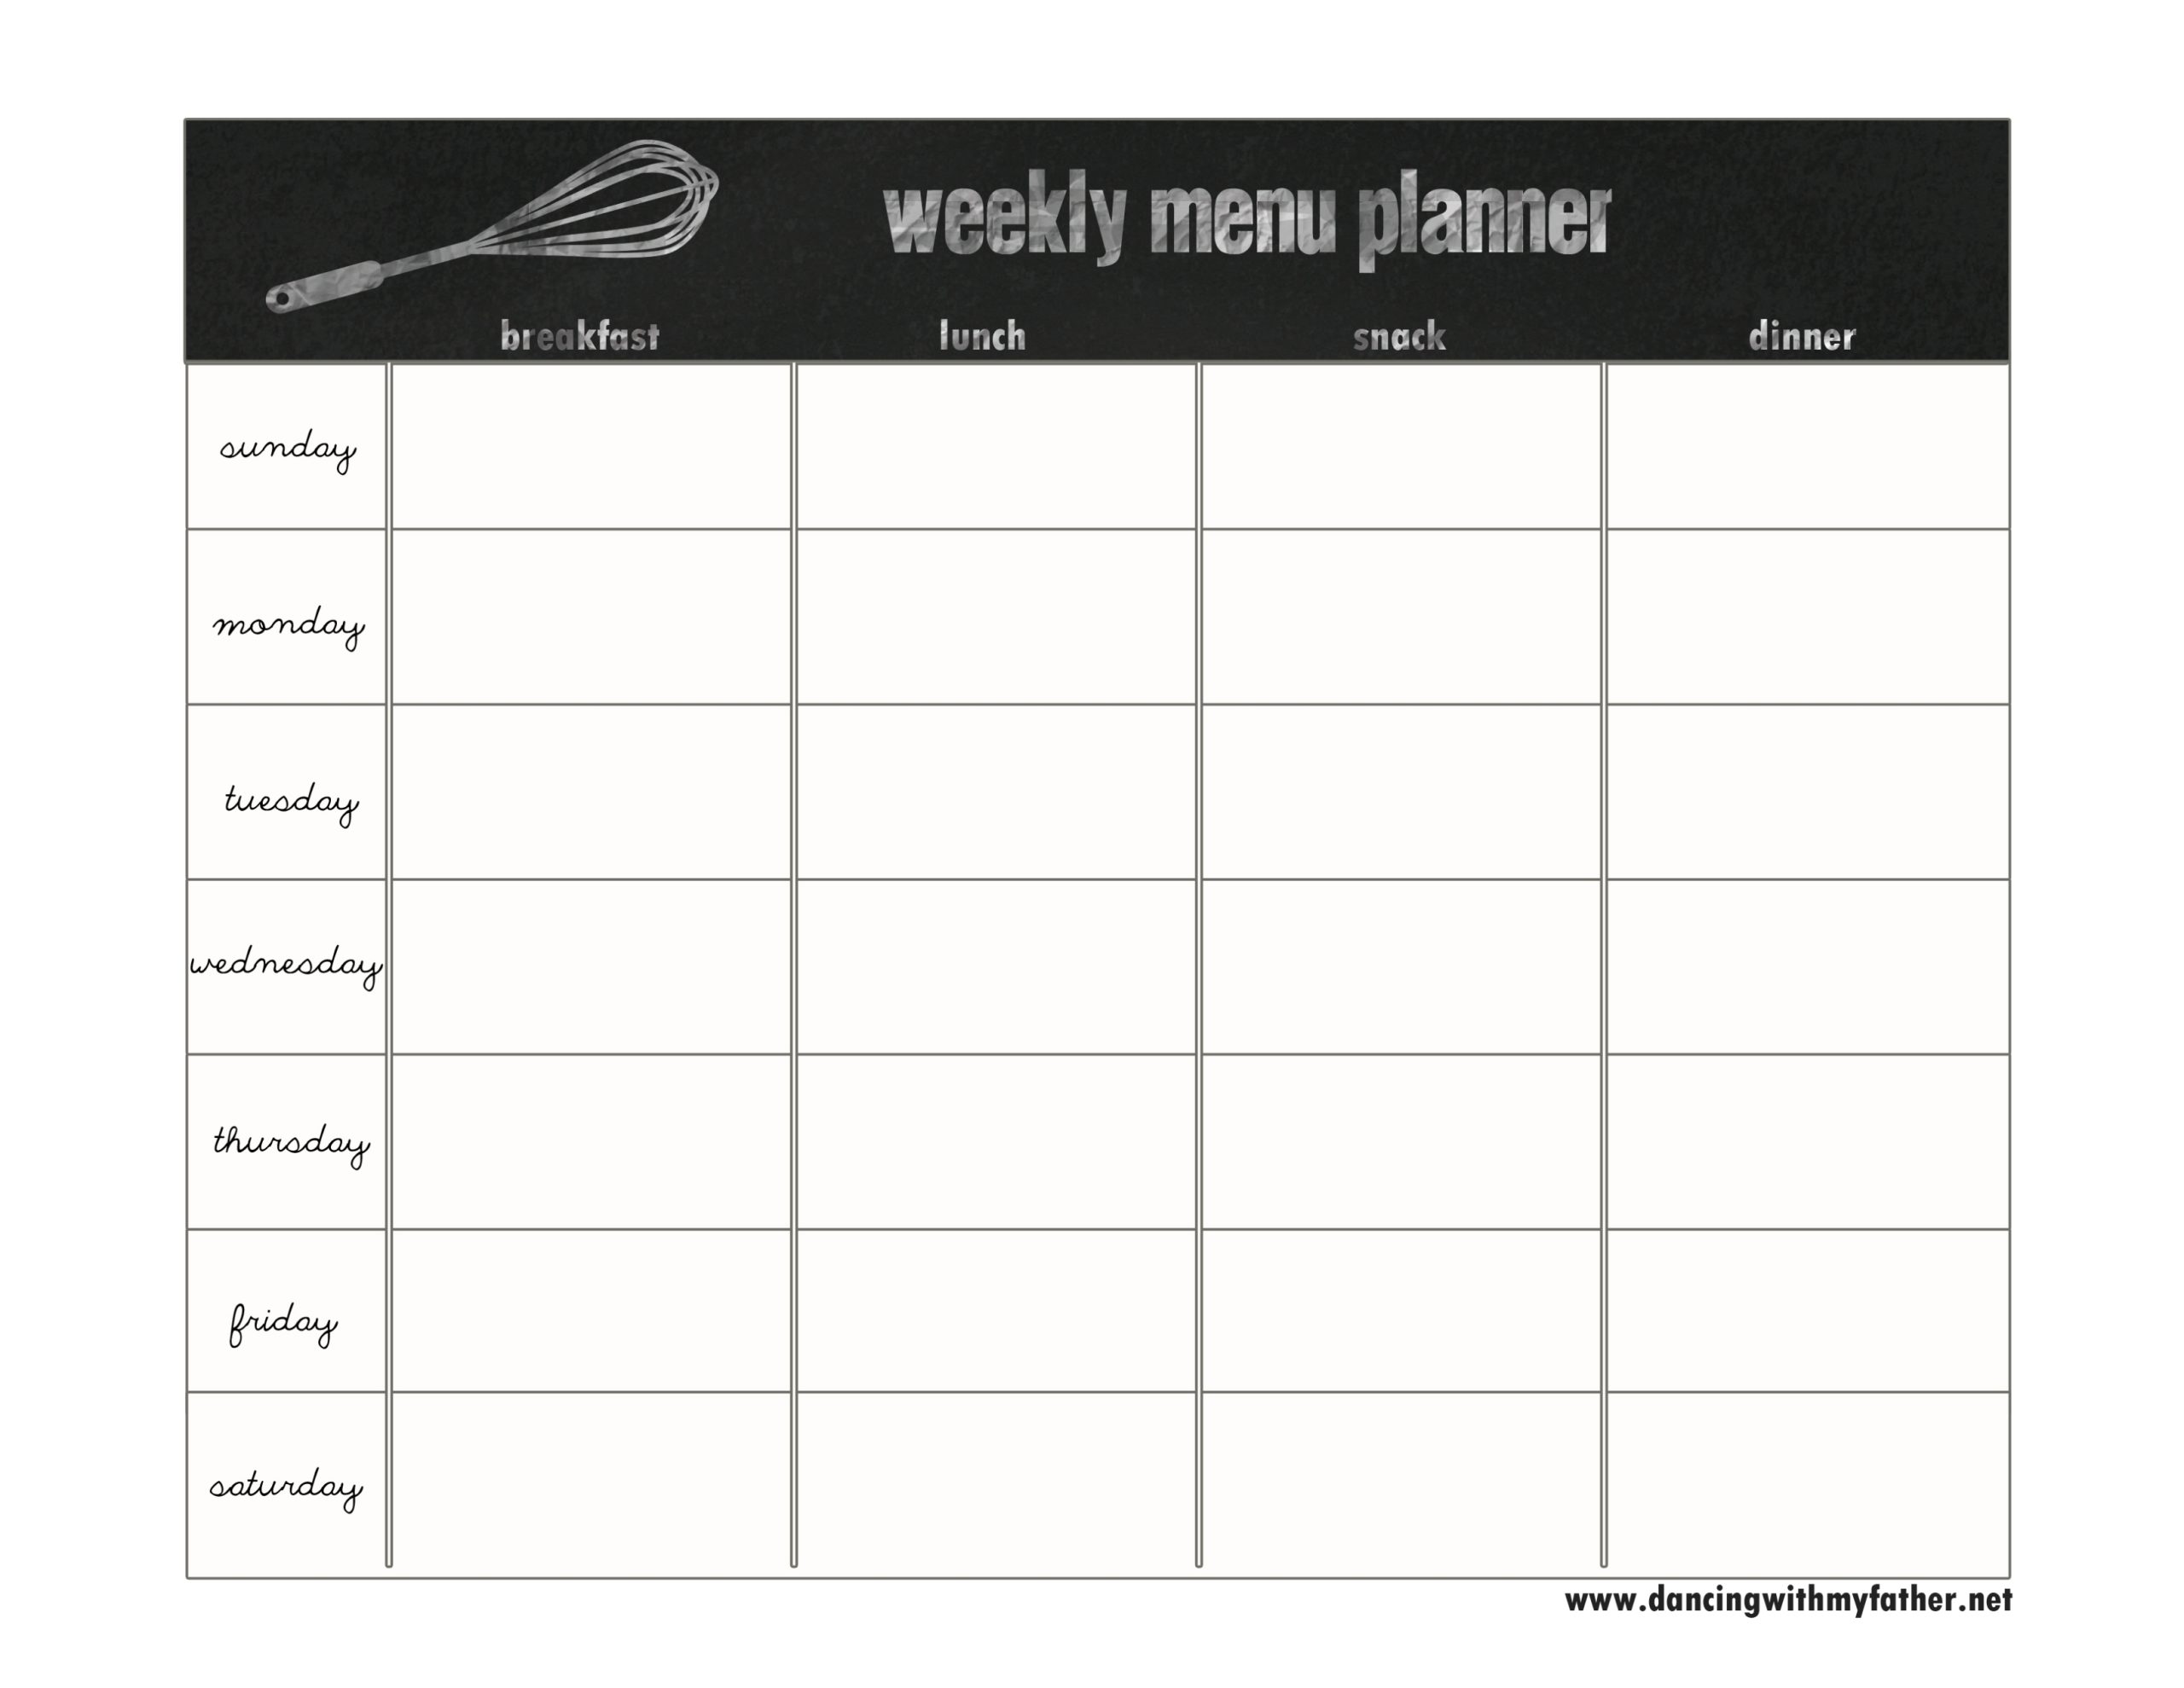 All Things New {Printable Menu Planner} | Dancing With My Father With Regard To Weekly Menu Planner Template Word